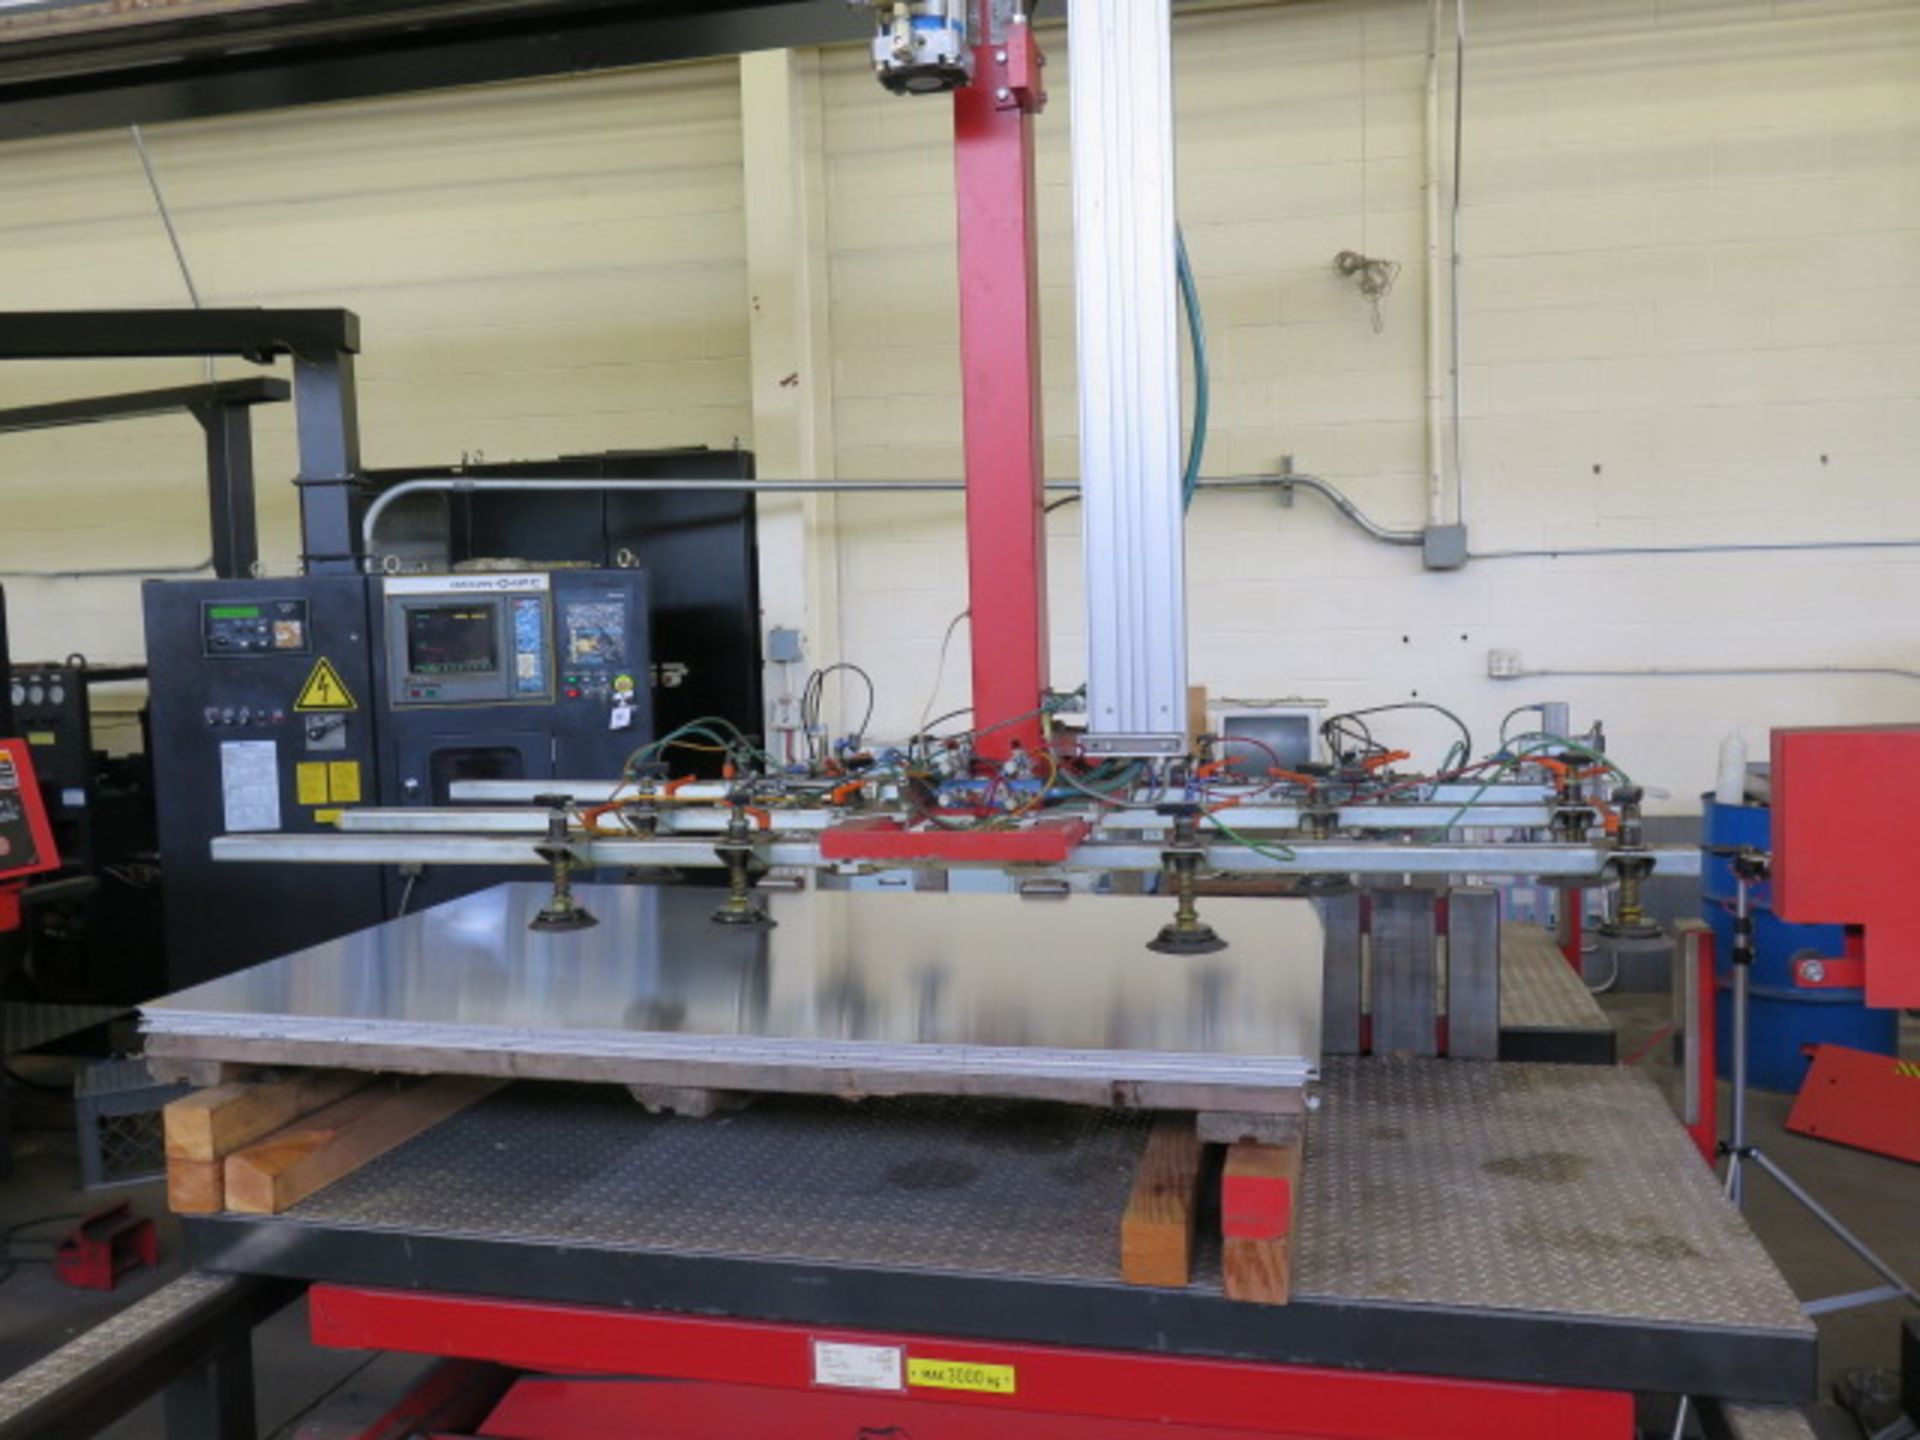 Amada VIPROS 357 30-Ton CNC Turret Punch Cell s/n 35710664 w/ 04P-C Controls, 58-Station, SOLD AS IS - Image 24 of 37